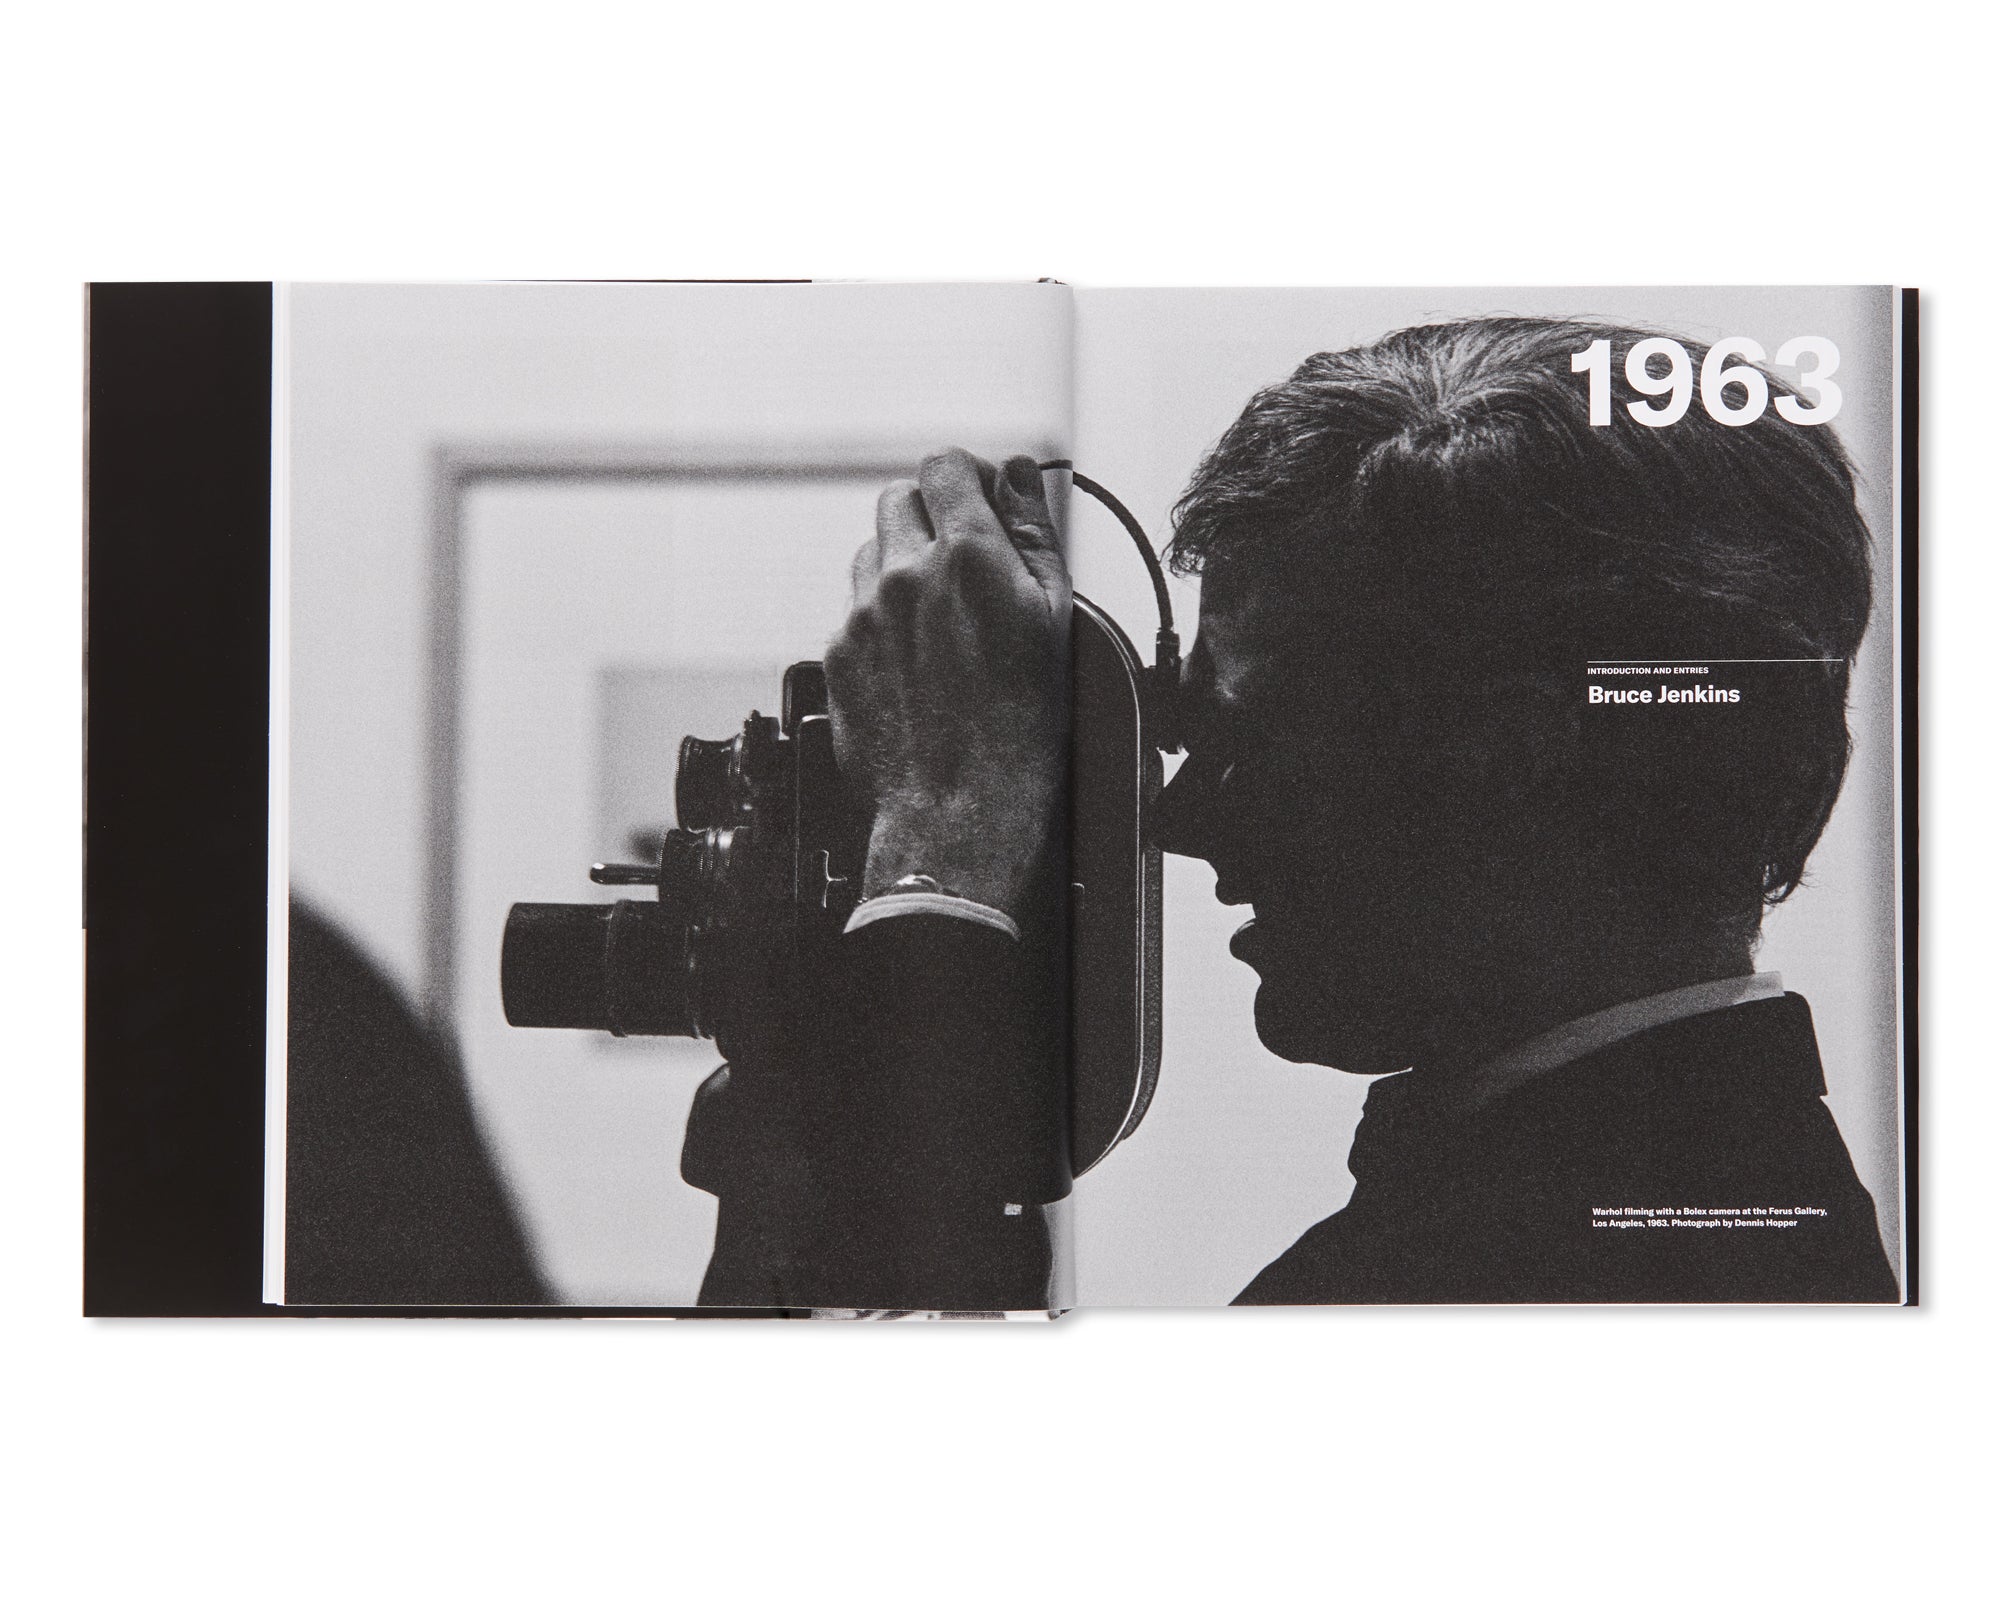 THE FILMS OF ANDY WARHOL CATALOGUE RAISONNE 1963-1965 by Andy Warhol